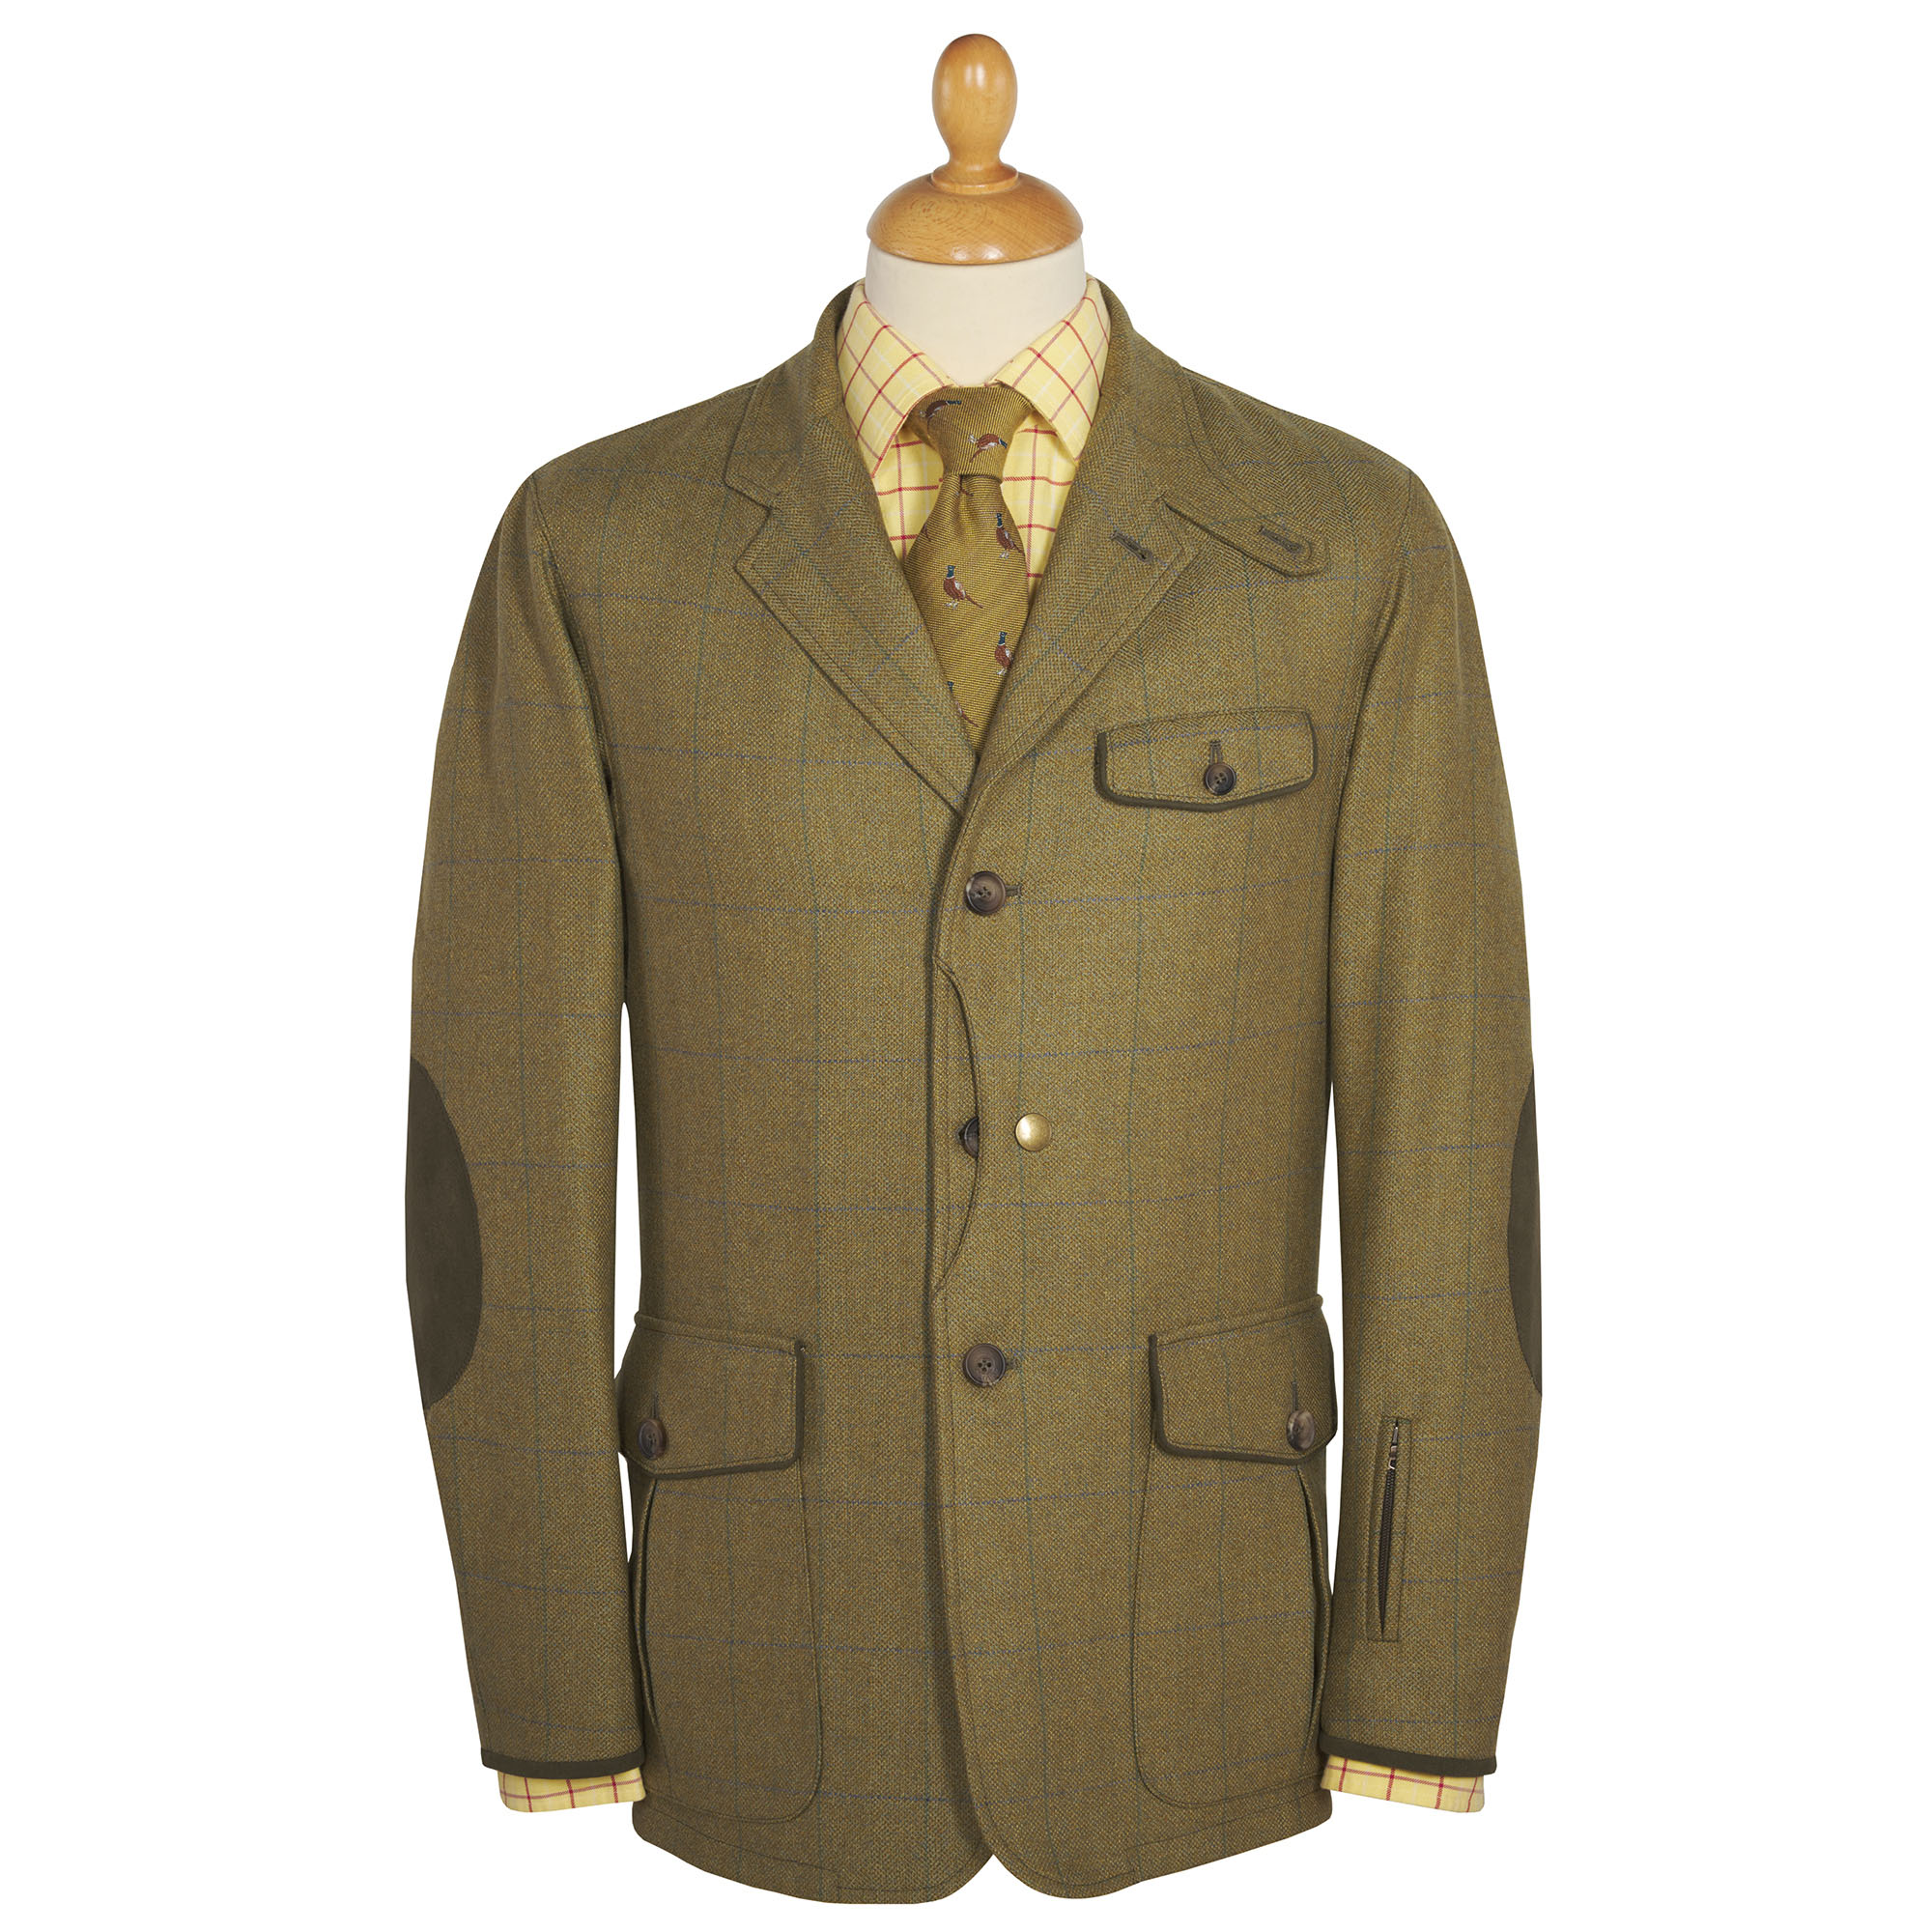 Grenfell Shooting Jacket | Men's Country Clothing | Cordings